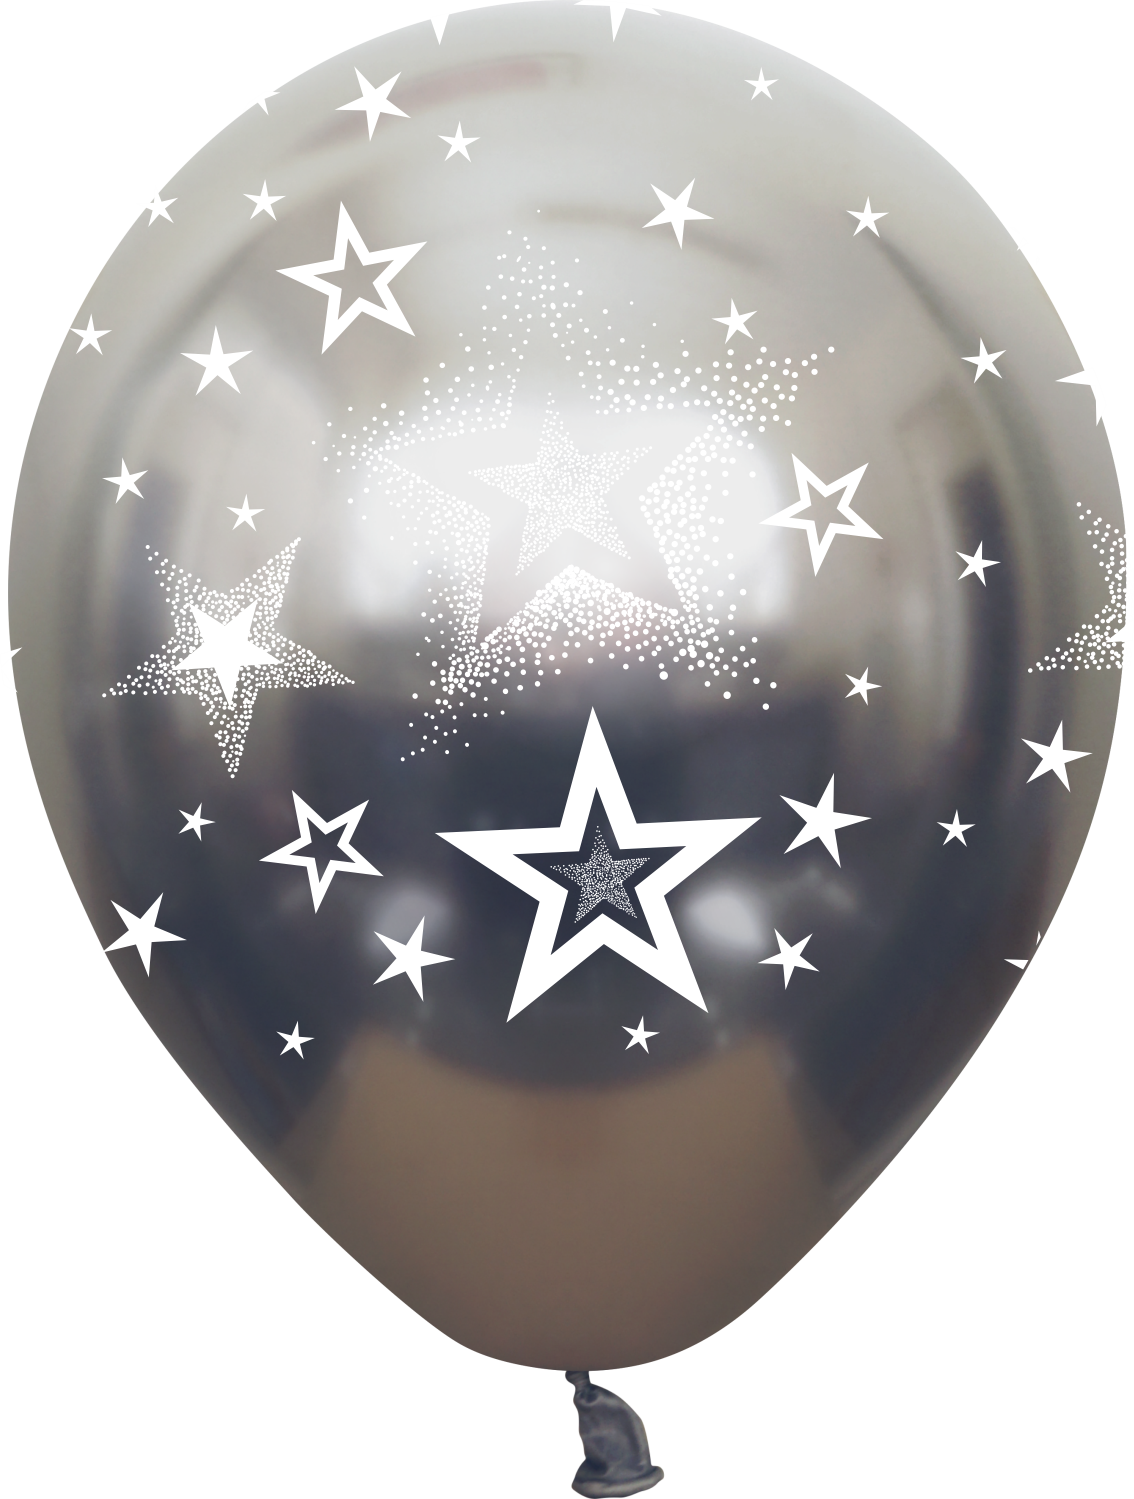 How transparent are clear latex balloons? : Bargain Balloons